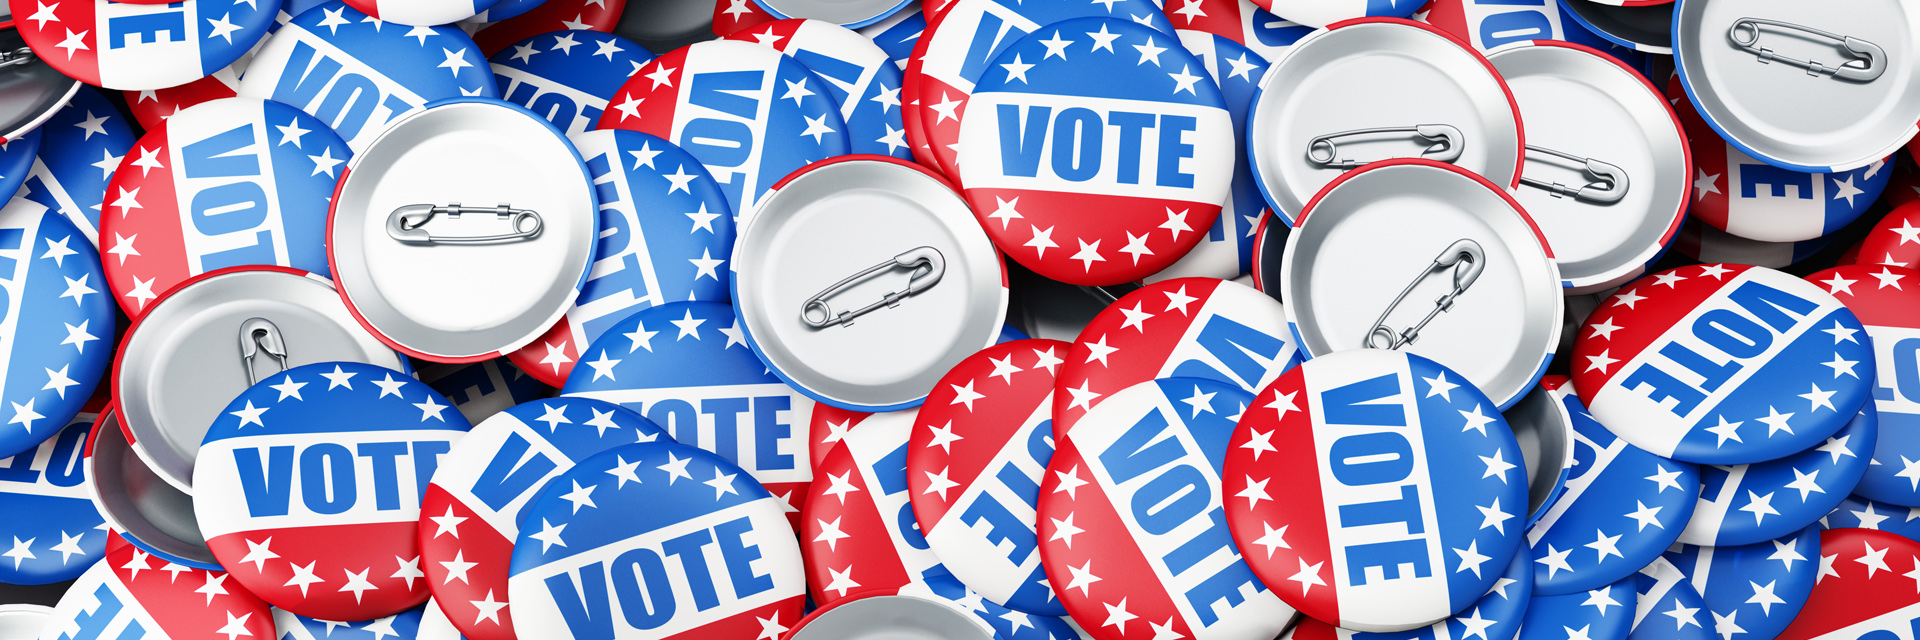 Voter buttons